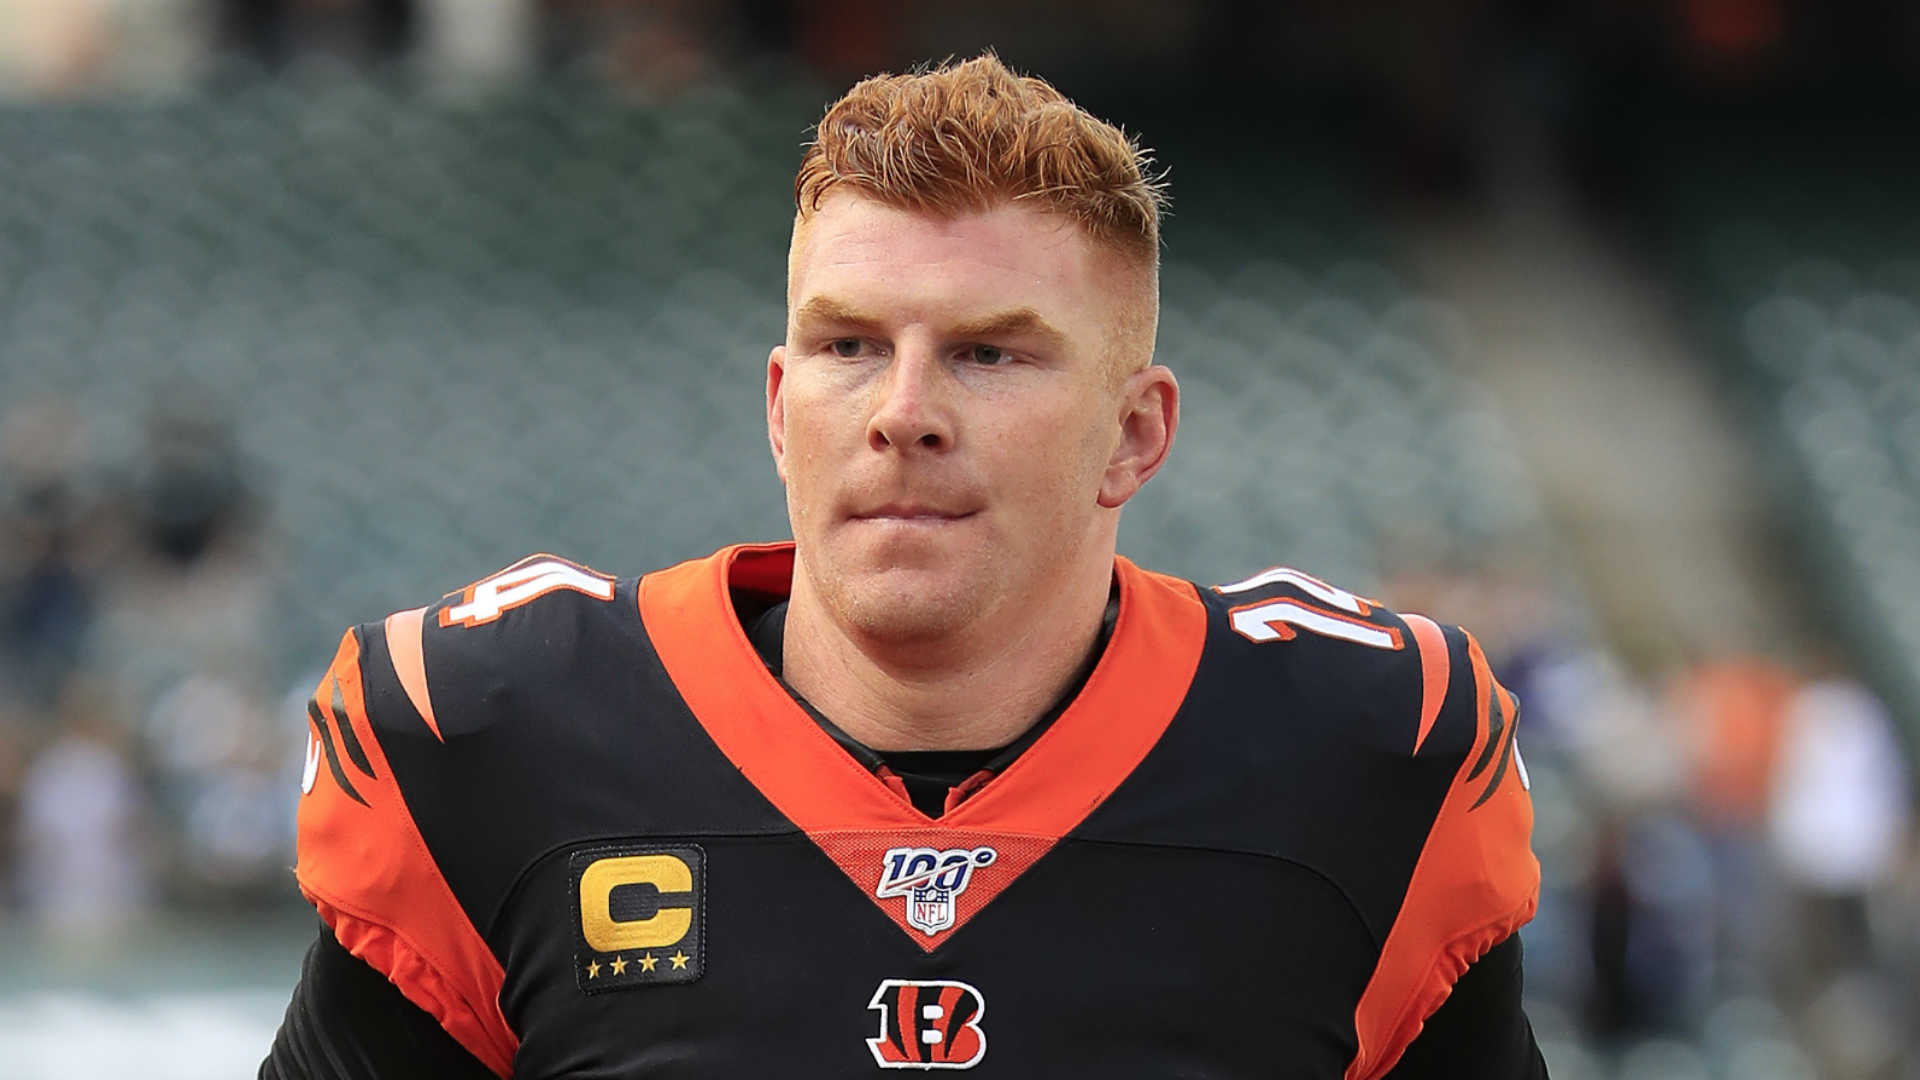 Andy Dalton deserves better from the Bengals